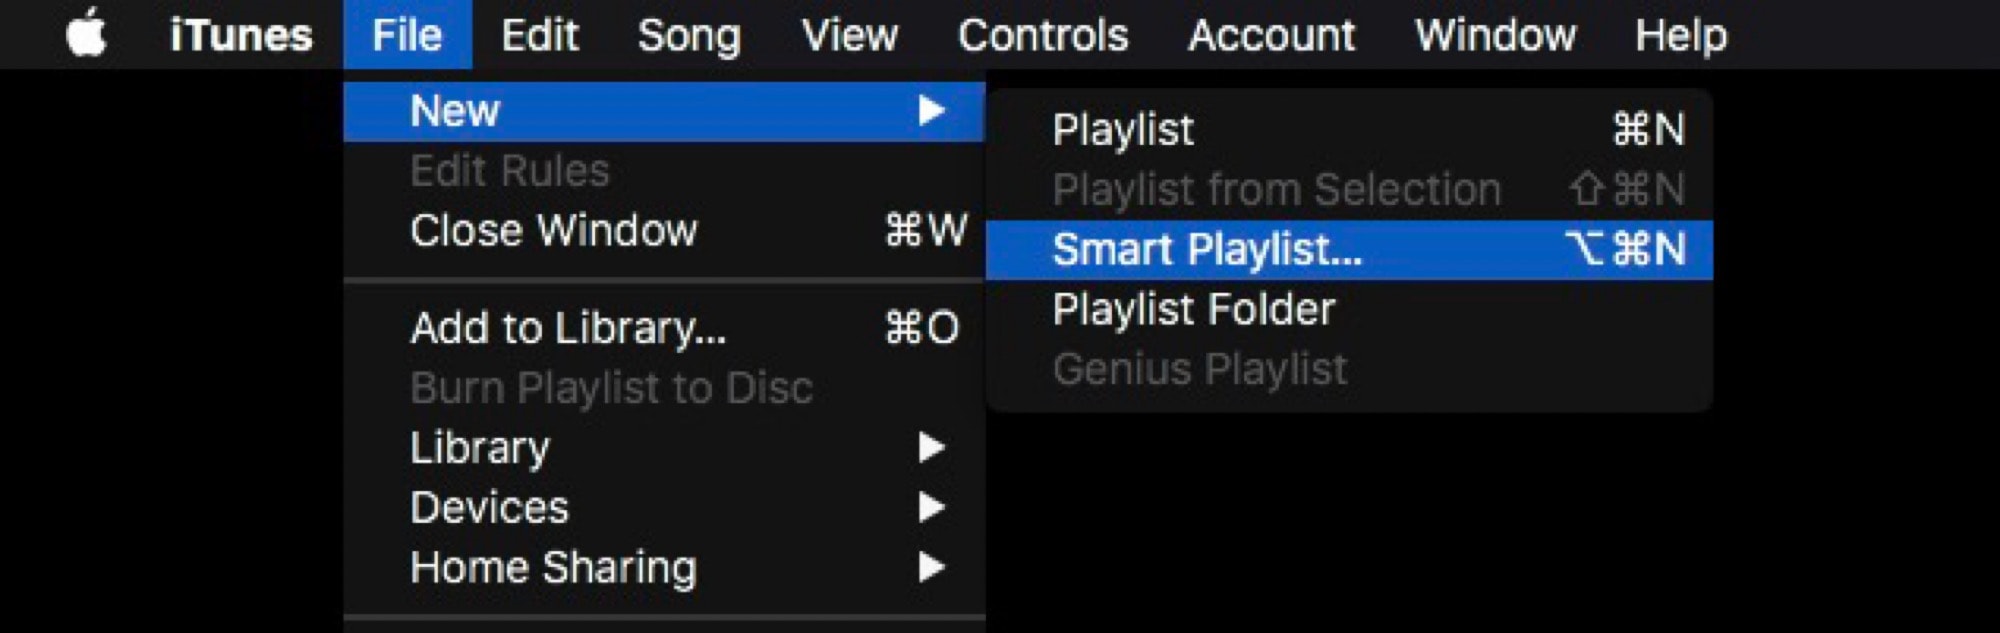 Create a new Smart Playlist in iTunes to get started.